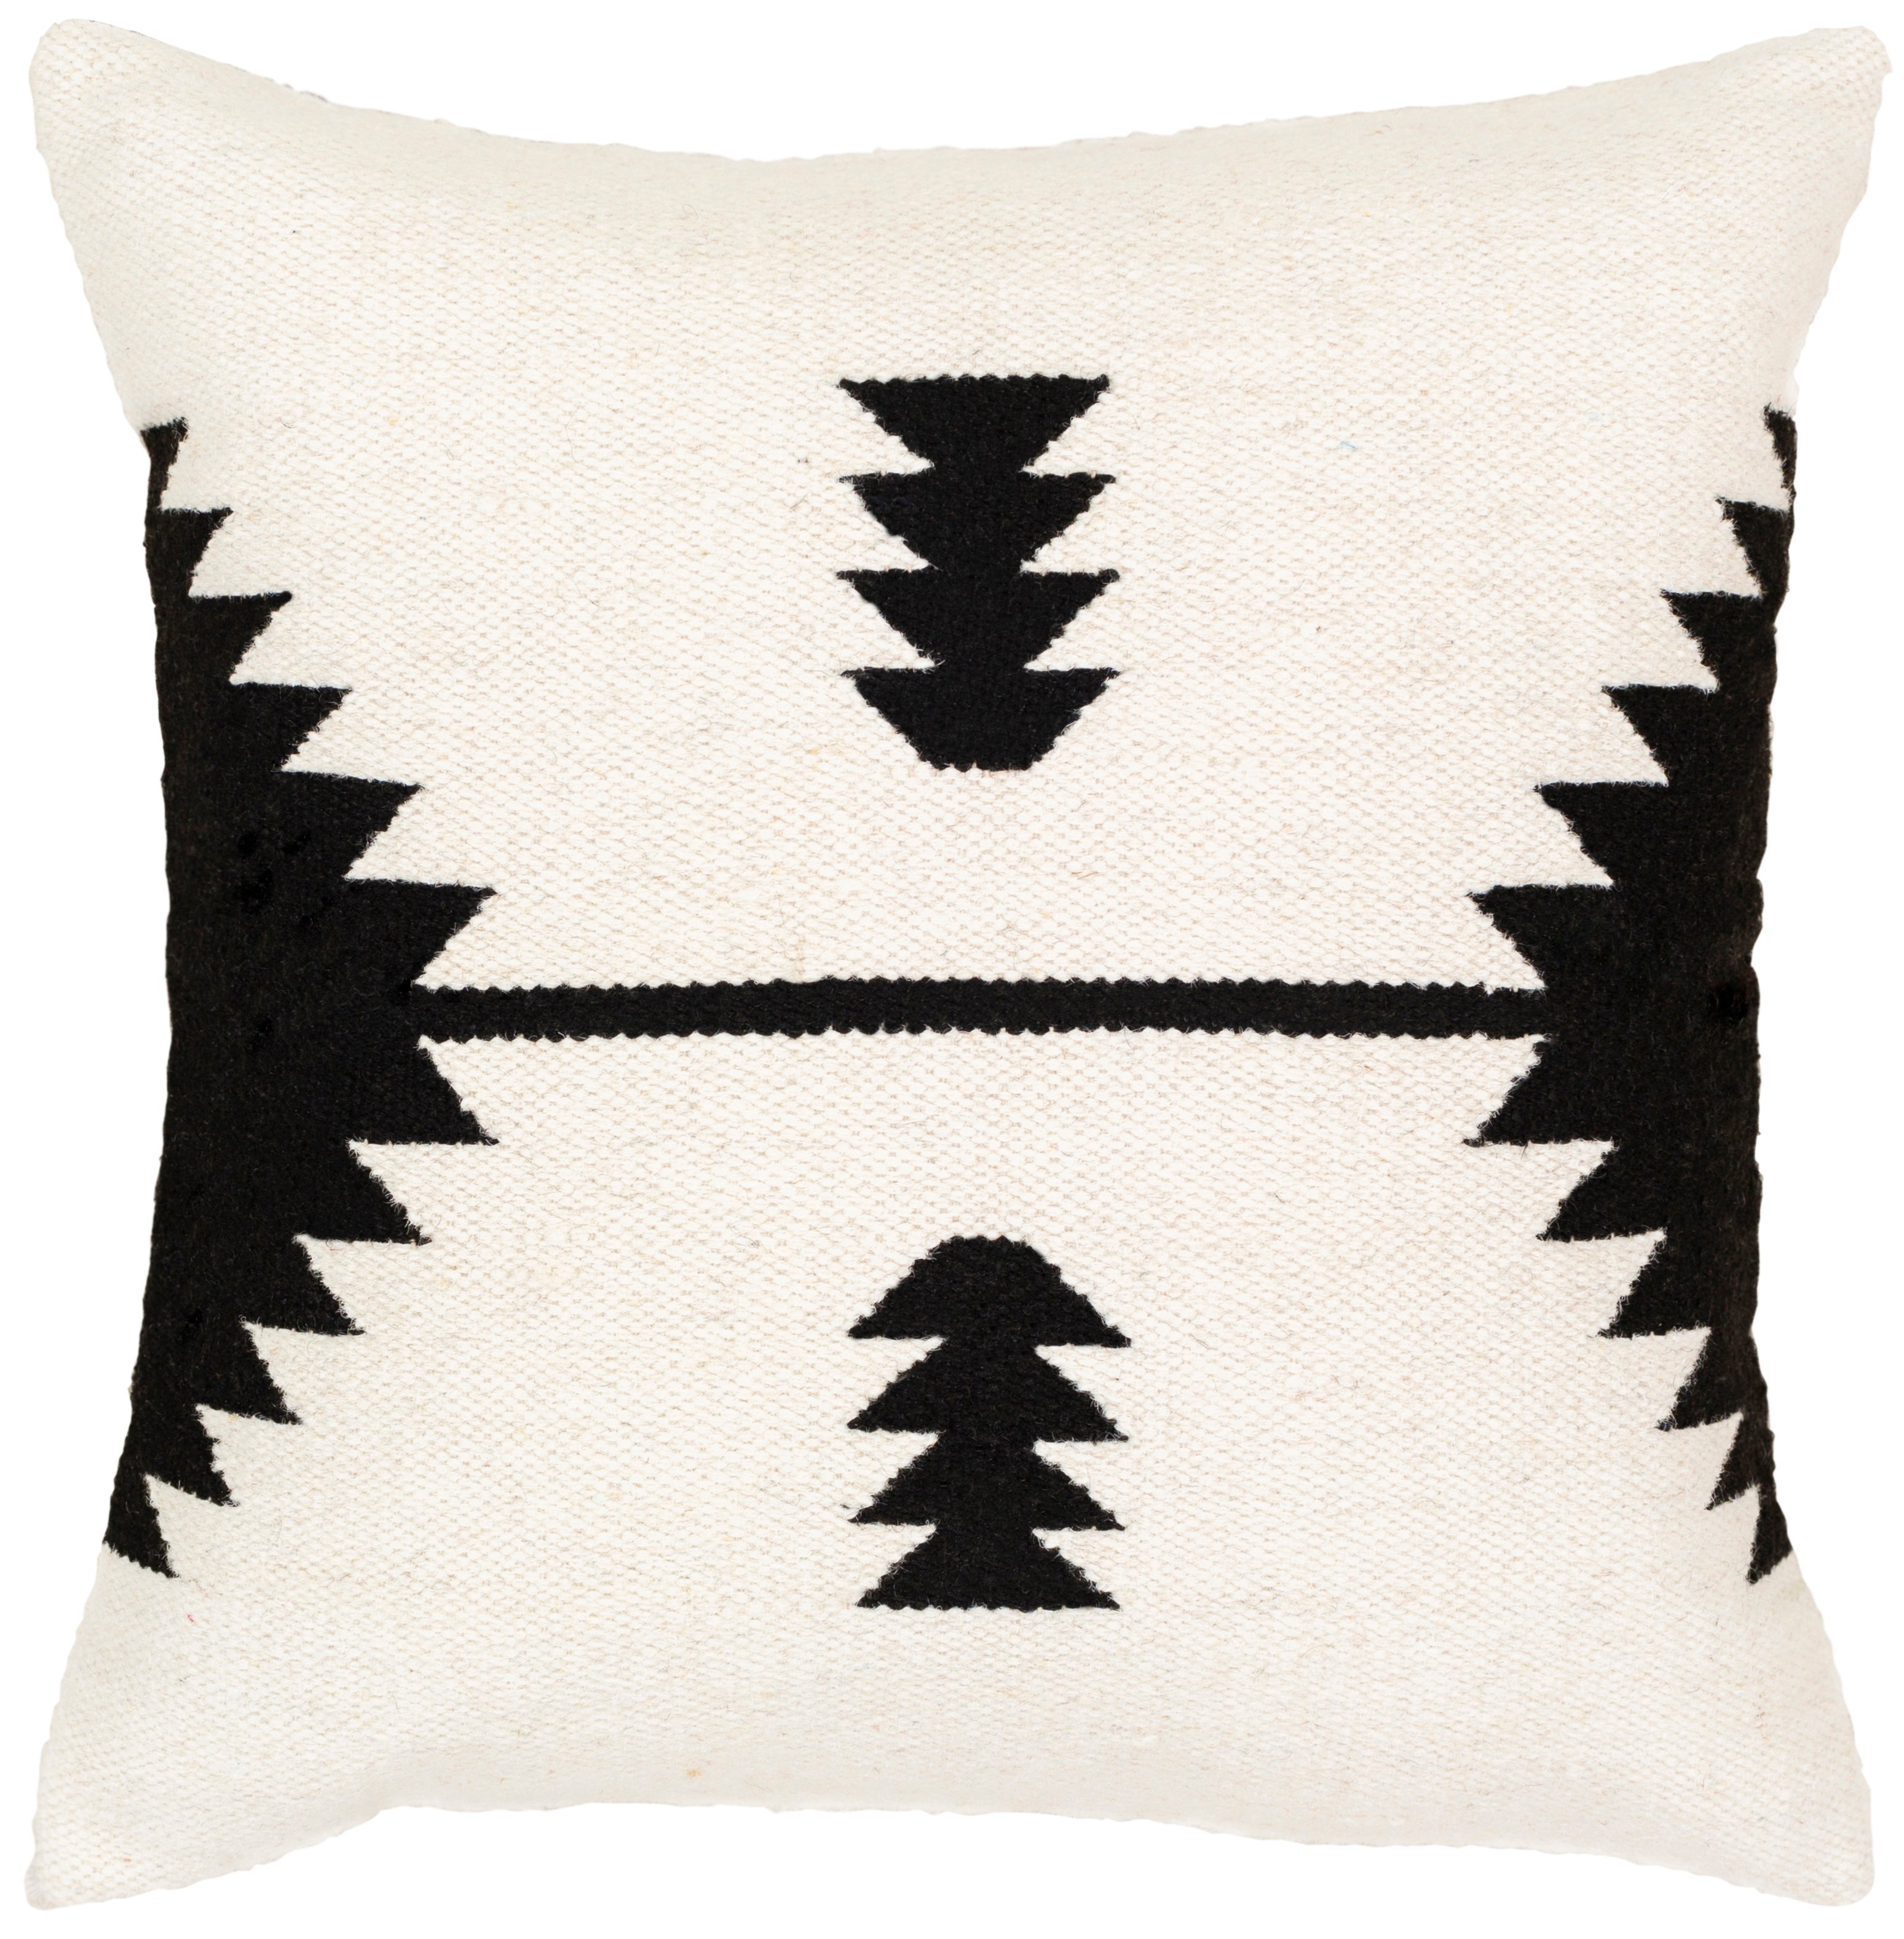 Shiprock Throw Pillow, 20" x 20", with down insert - Image 1